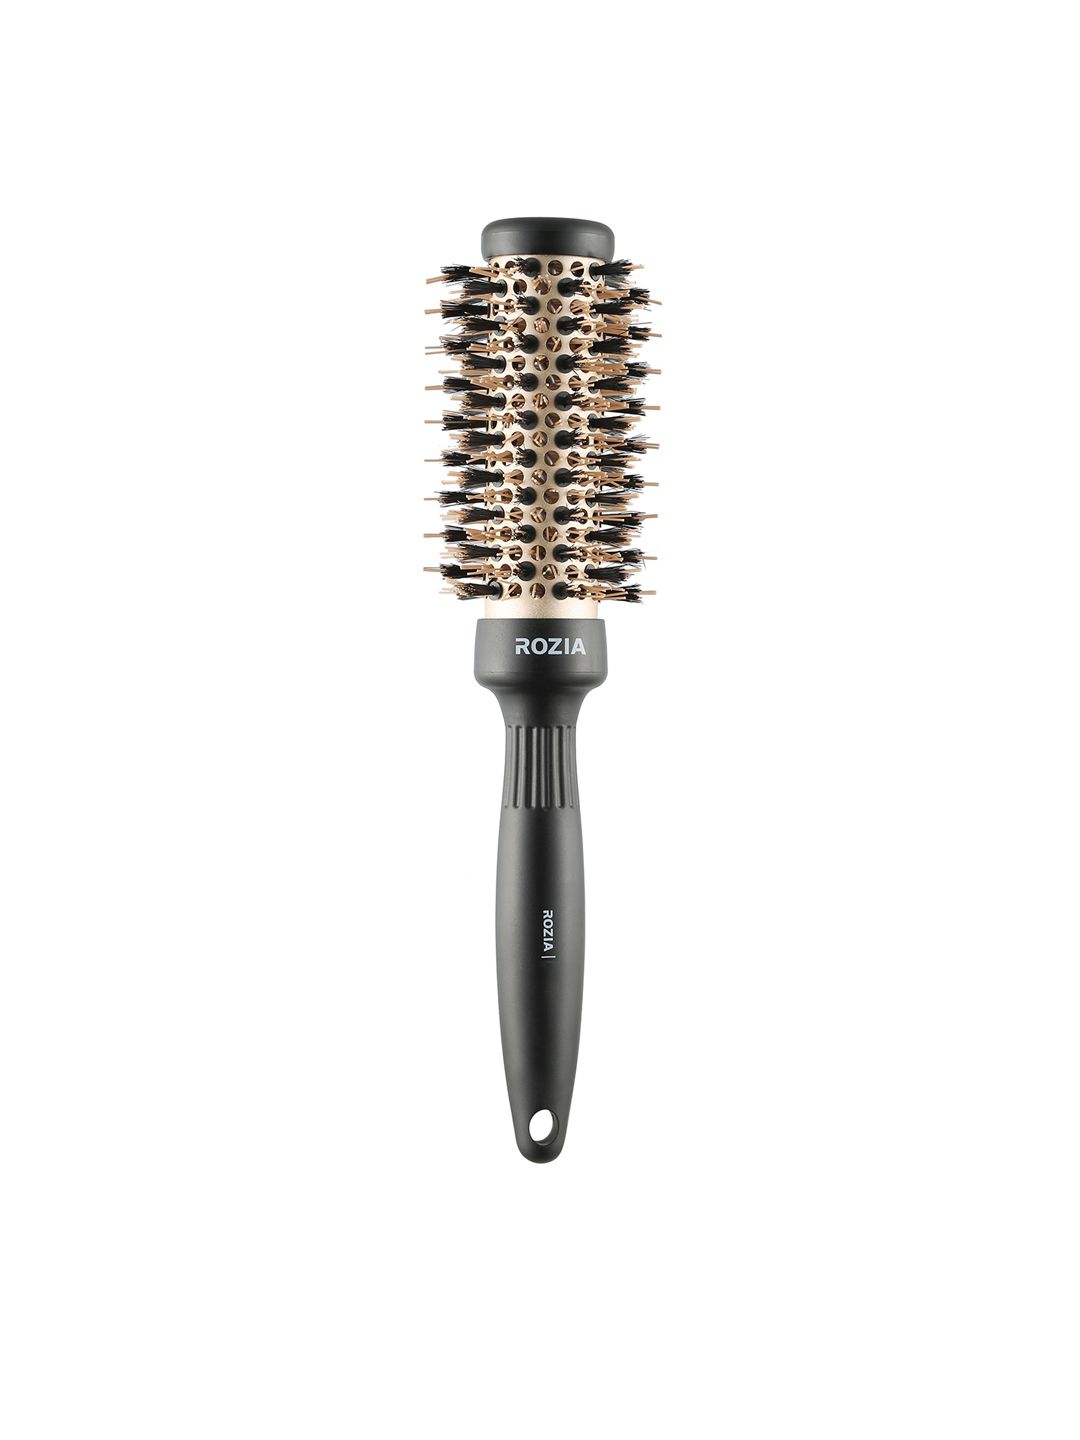 Rozia Unisex Grey & Gold-Toned Pro Boar Bristles Round Hairbrush 32mm Price in India